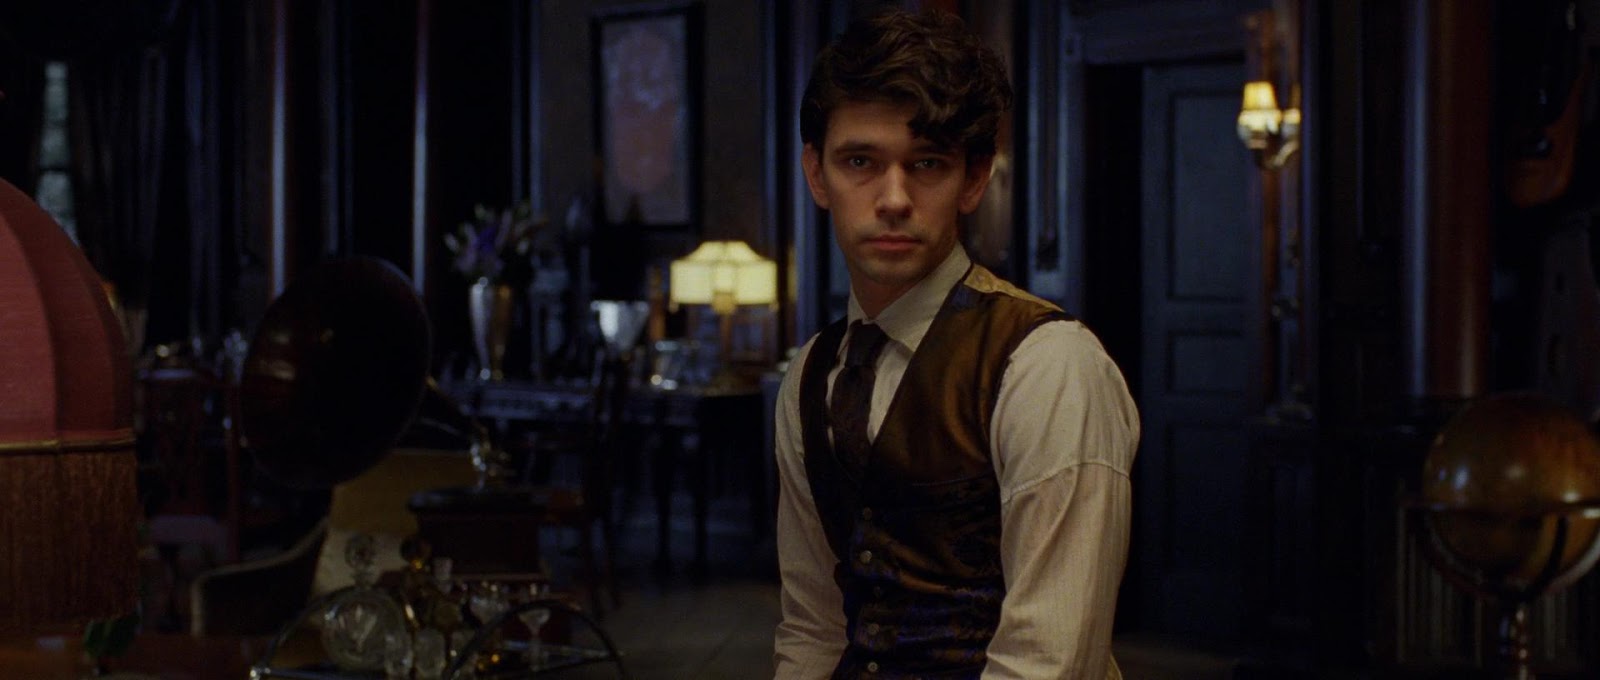 RESTITUDA1 S WORLD OF MALE NUDITY Ben Whishaw And Robin Morrissey In